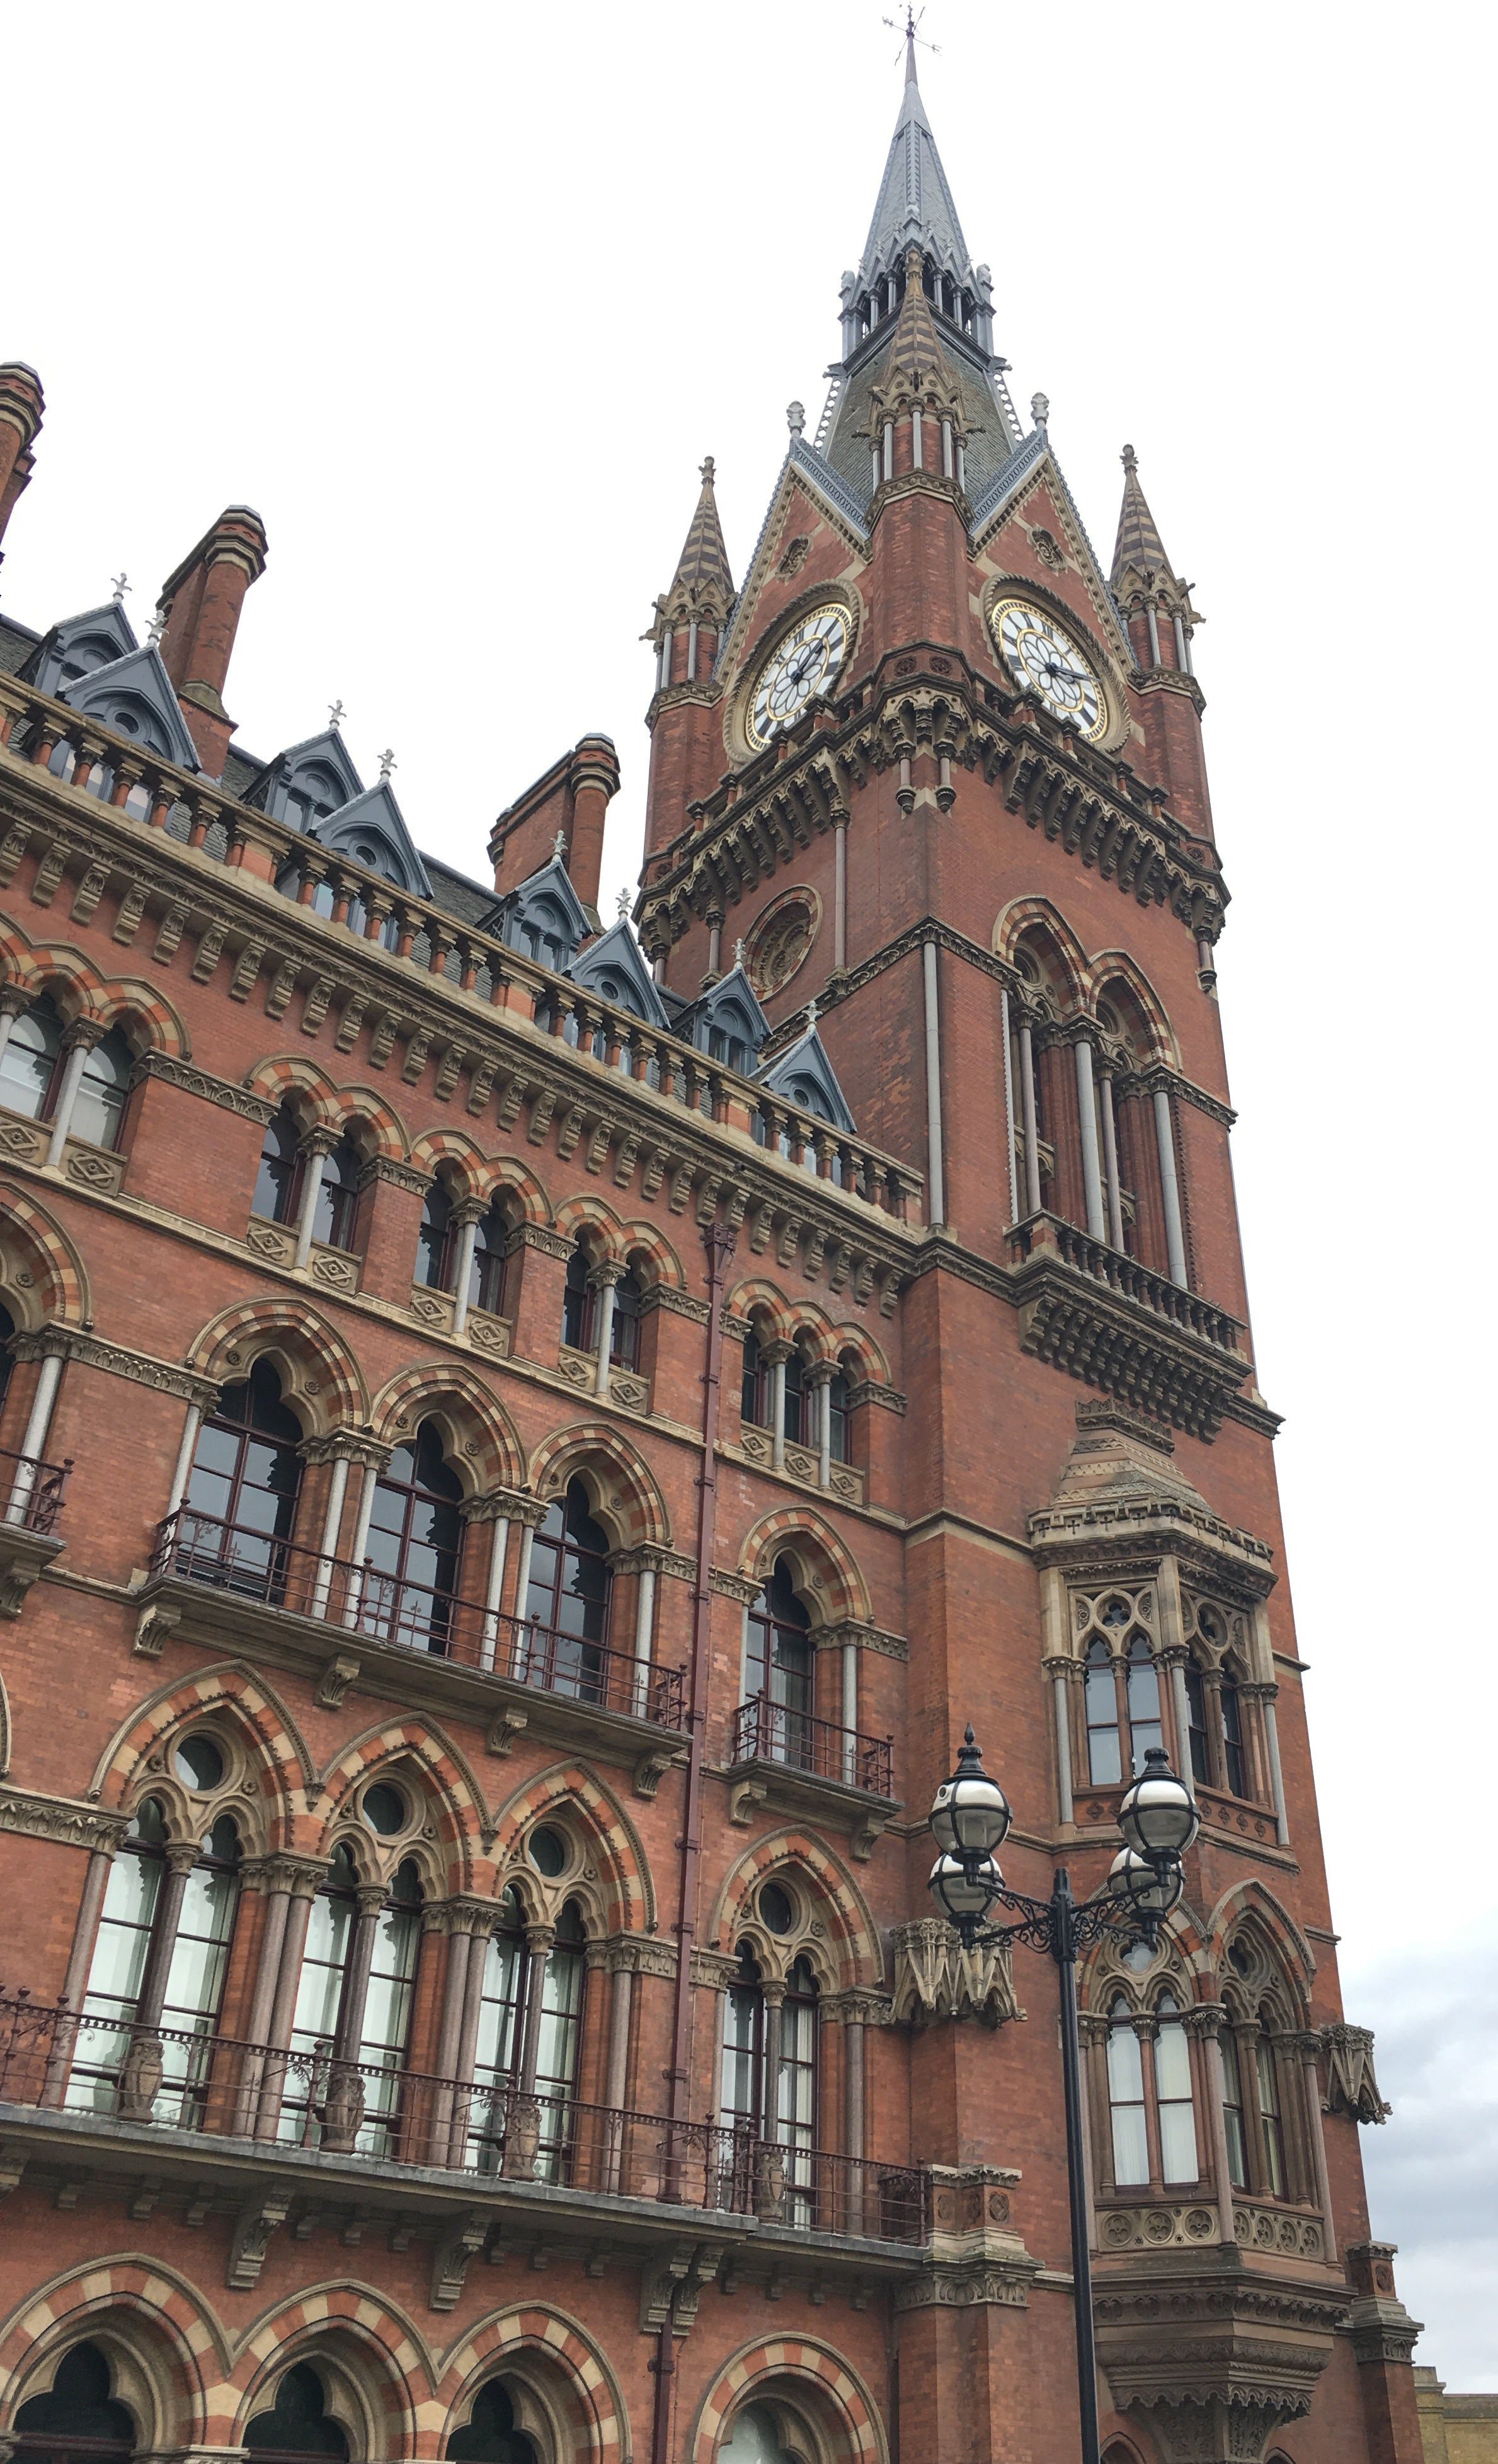 The Chambers and clocktower on the front of the station, lovely Victorian architecture.